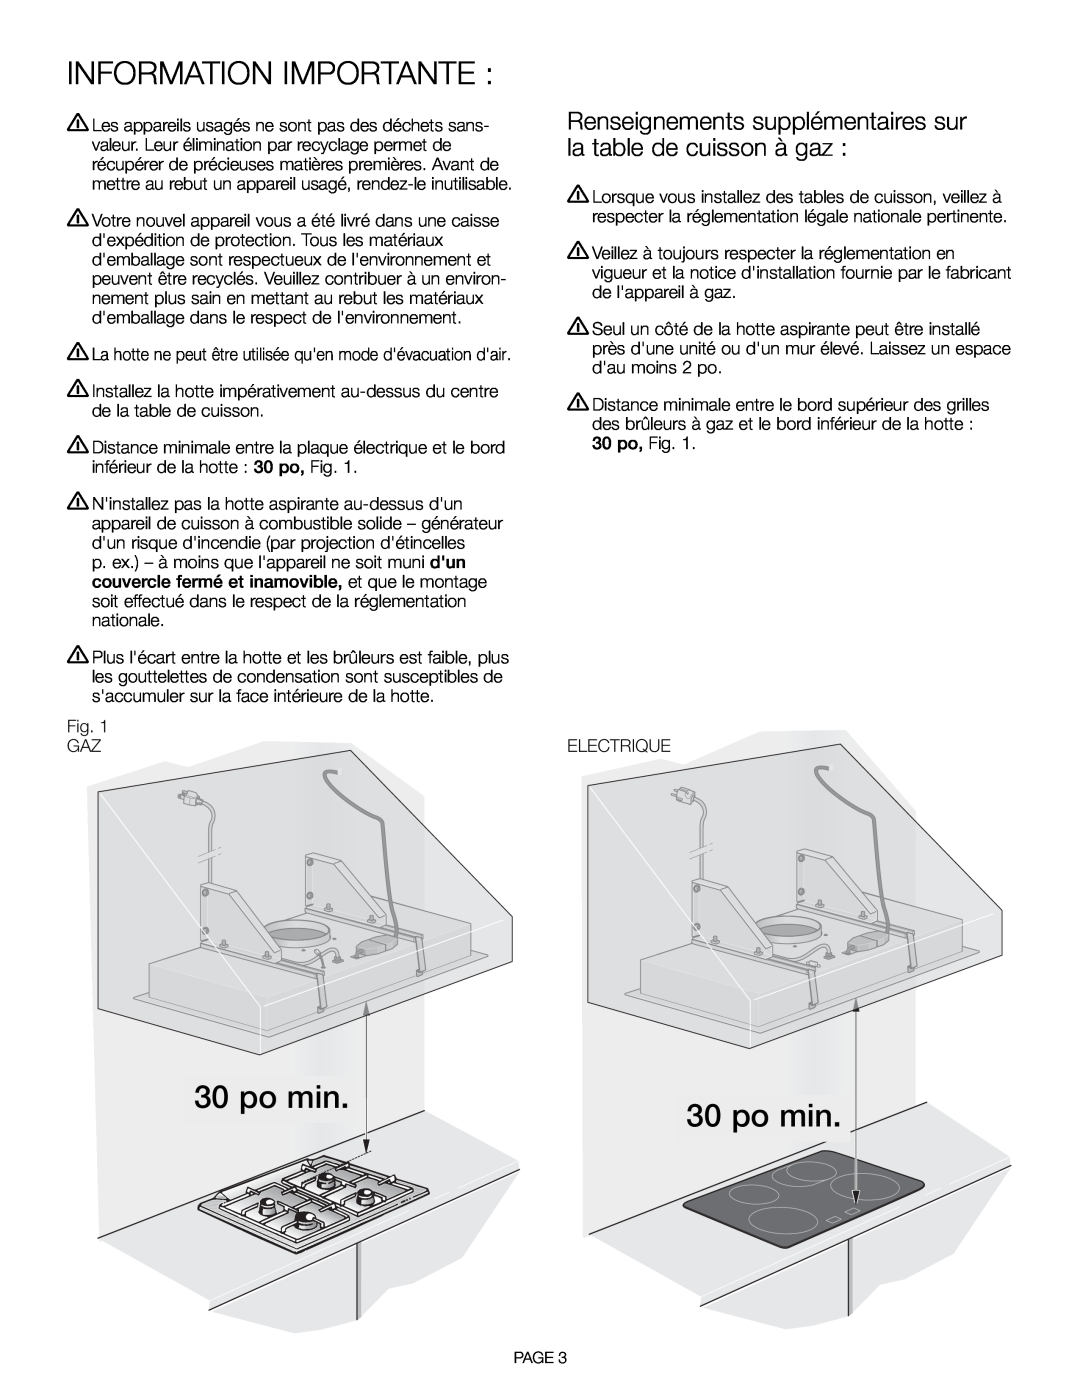 Thermador VCI 230/236/248 DS installation manual Information Importante, po min 